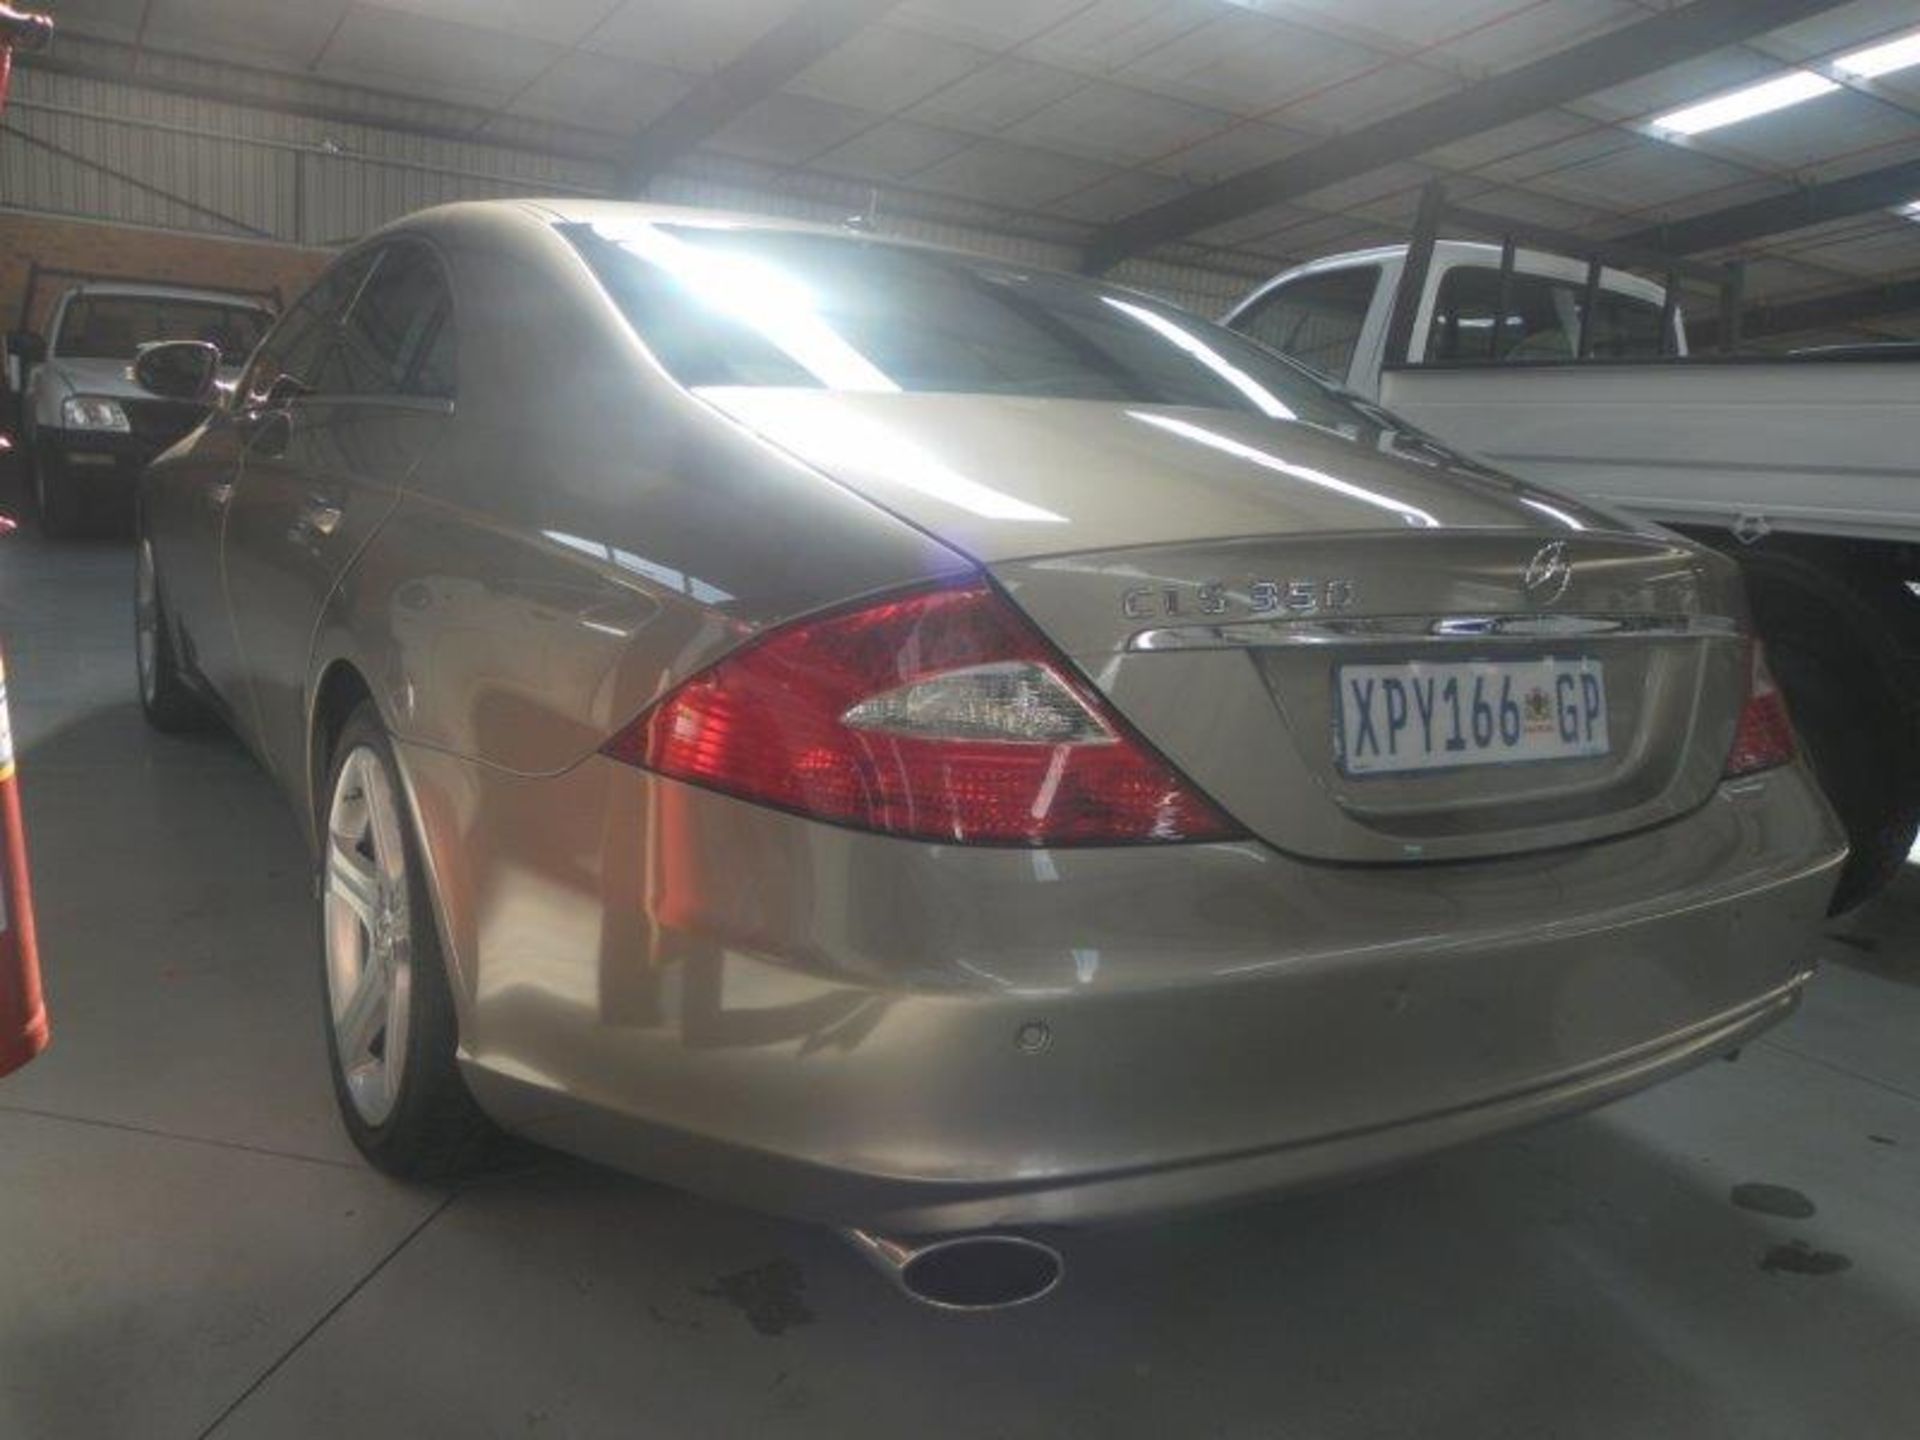 2008 XPY166GP Mercedes-Benz Cls350 Auto (Vin No: WDD2193562A135151 )(219140 kms) - Image 4 of 5